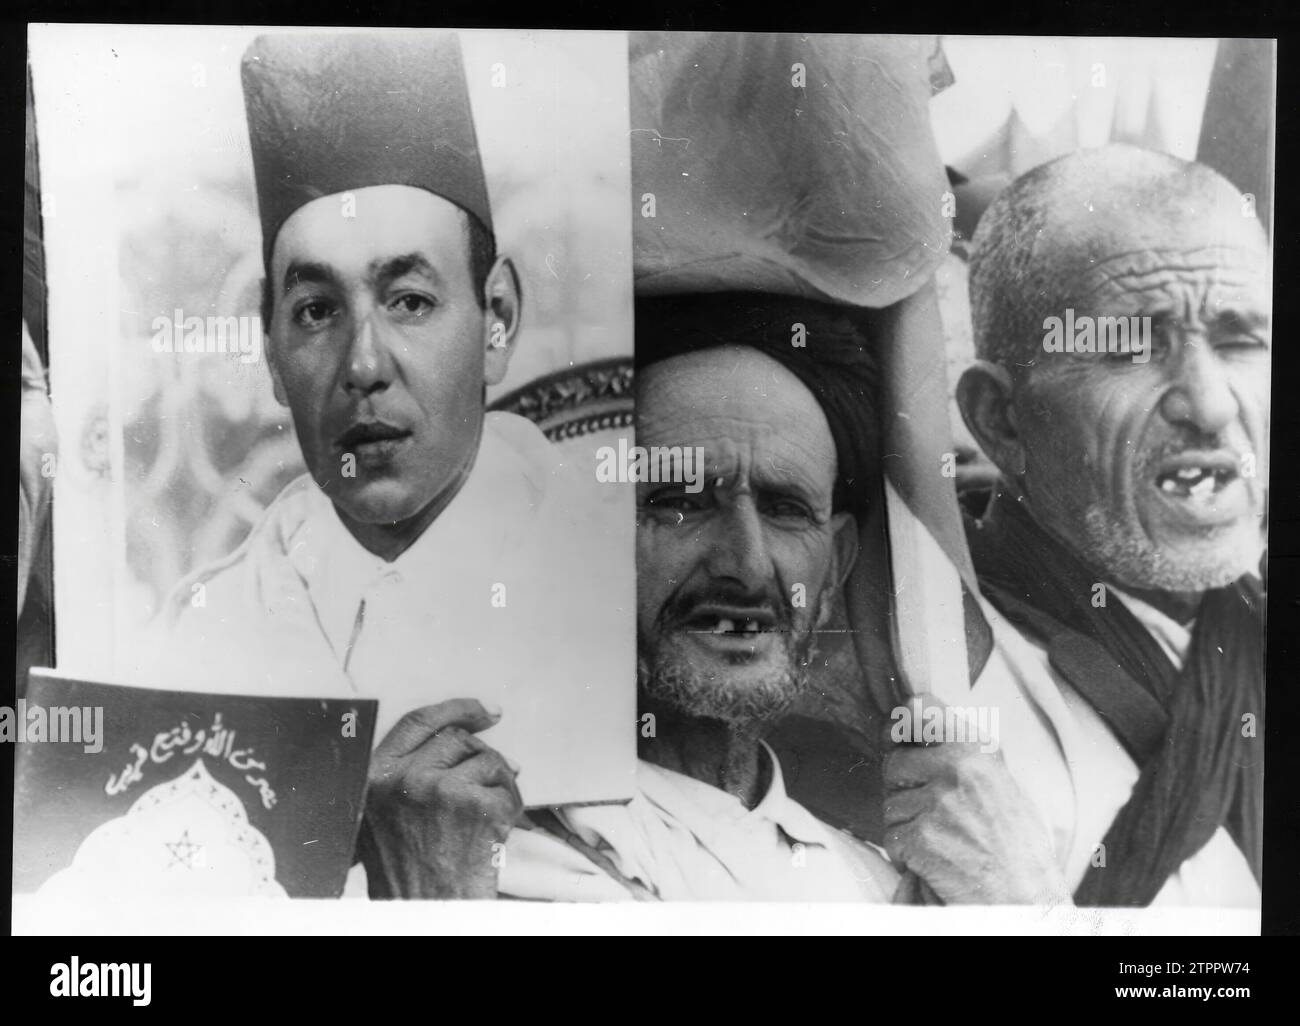 Moroccan protesters at the Green March in 1975. Credit: Album / Archivo ABC Stock Photo